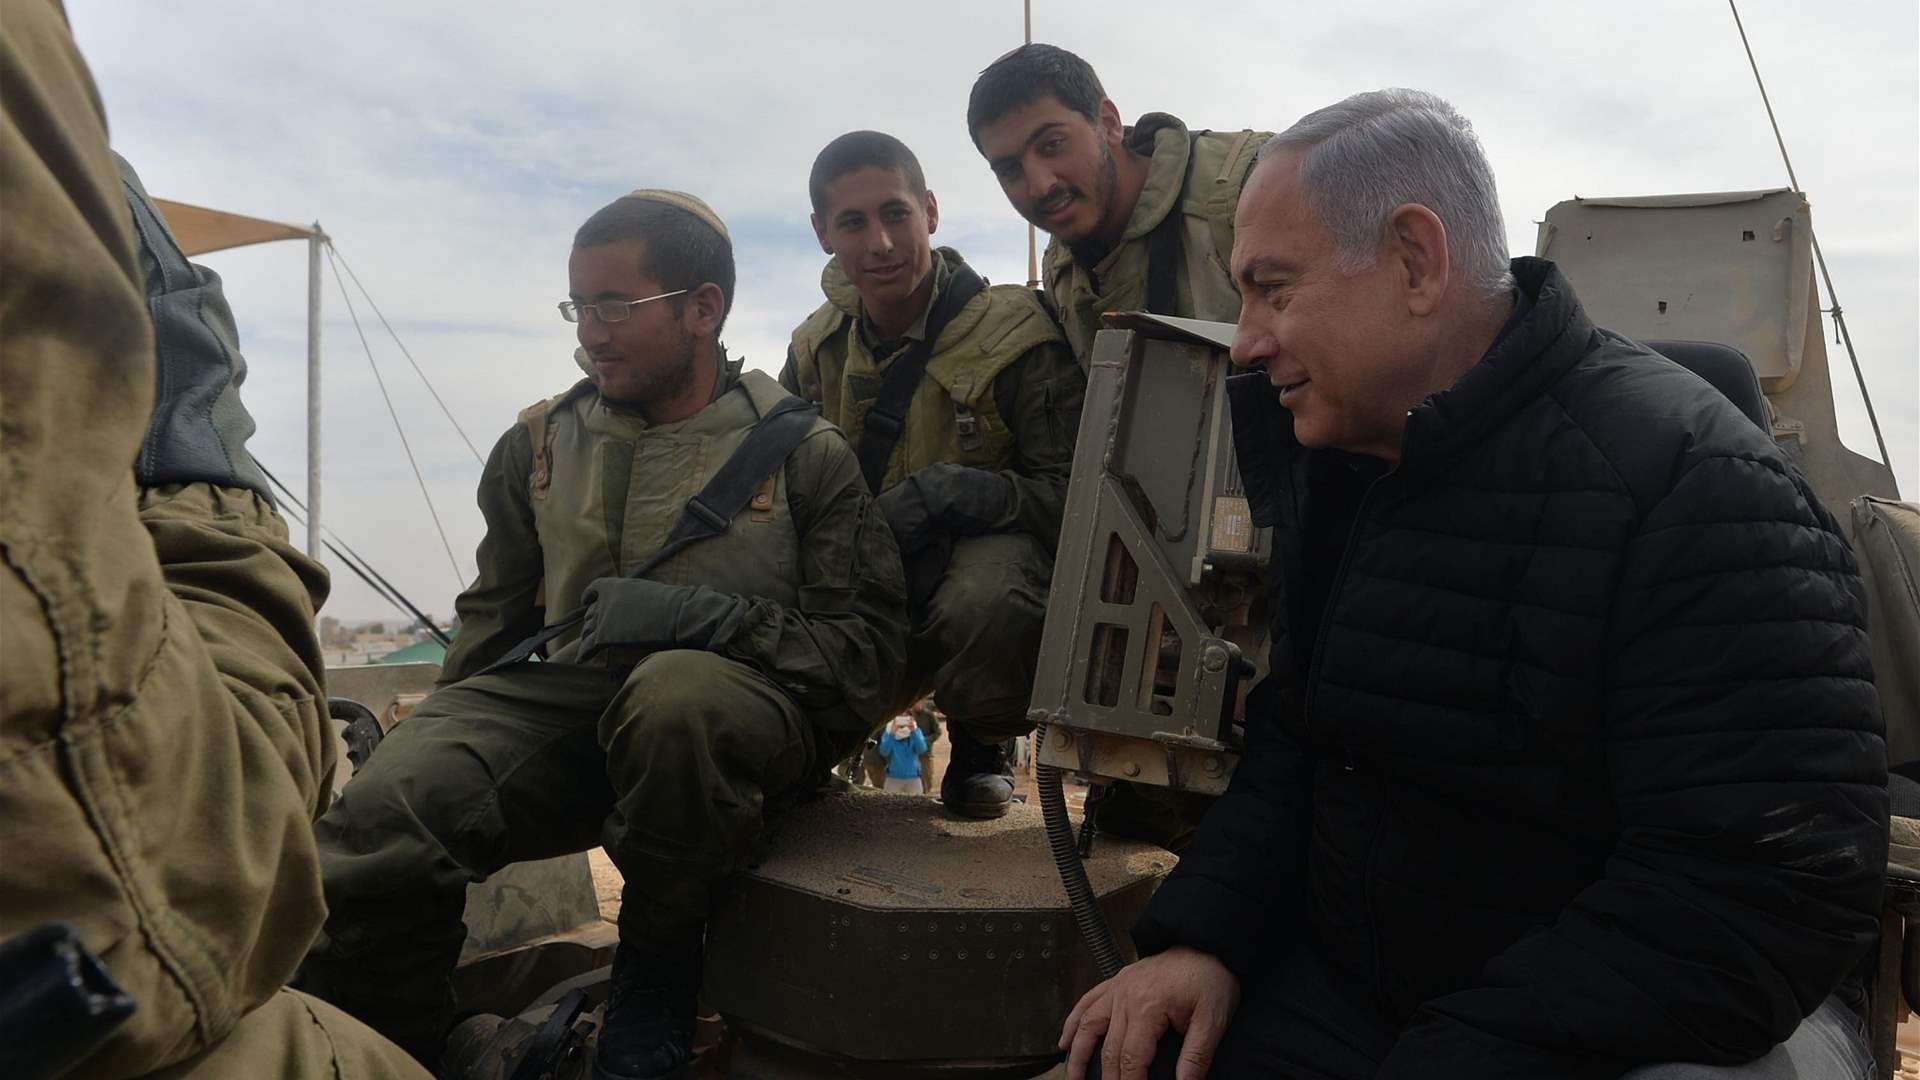 Netanyahu&#39;s visit to Israeli soldiers: Preparing for &quot;the next phase&quot;